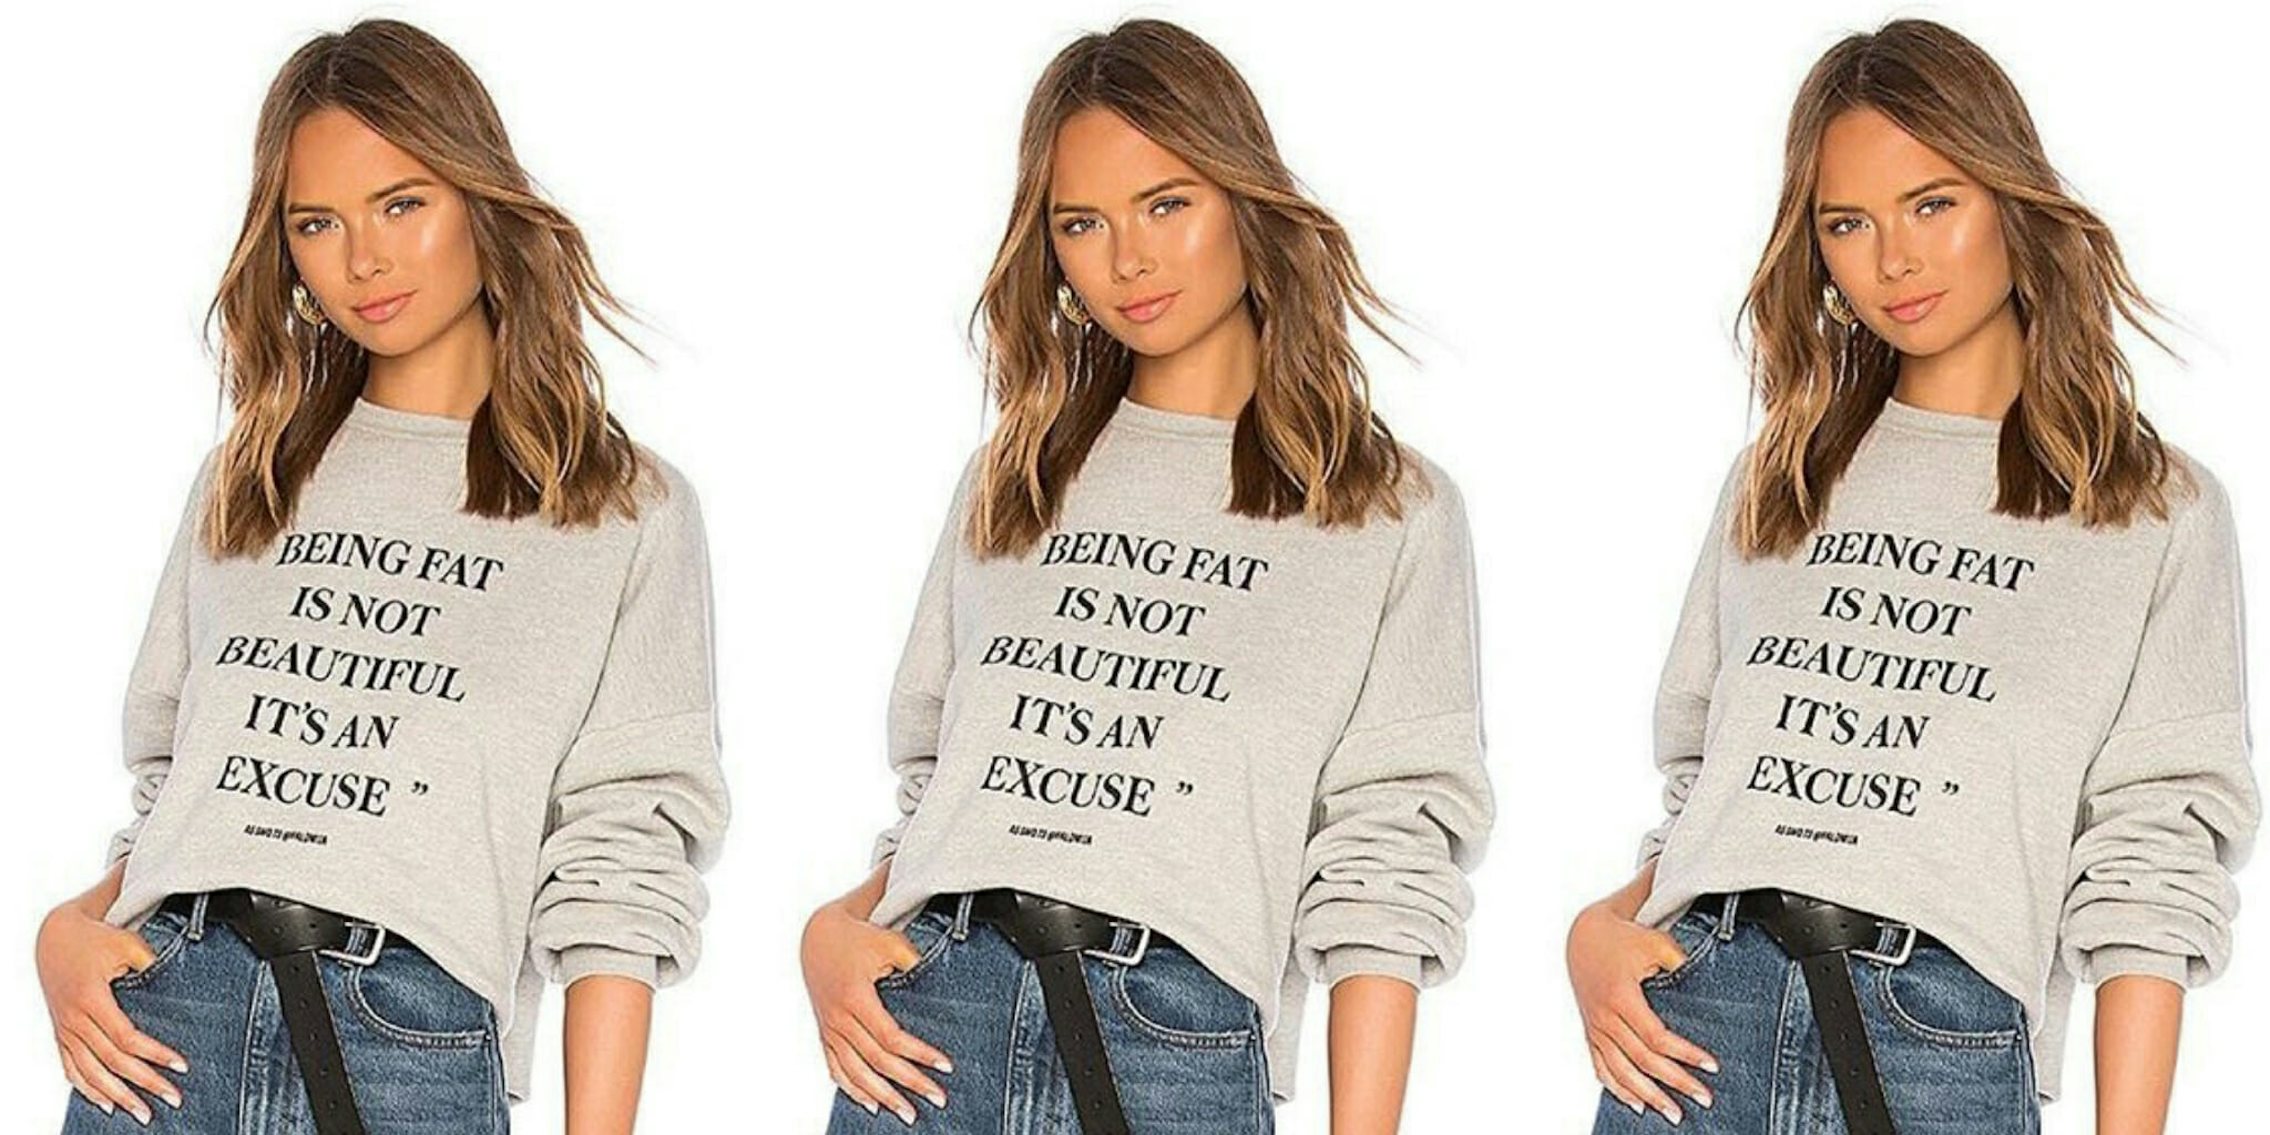 A thin model wearing a sweatshirt that says 'BEING FAT IS NOT BEAUTIFUL IT’S AN EXCUSE.'